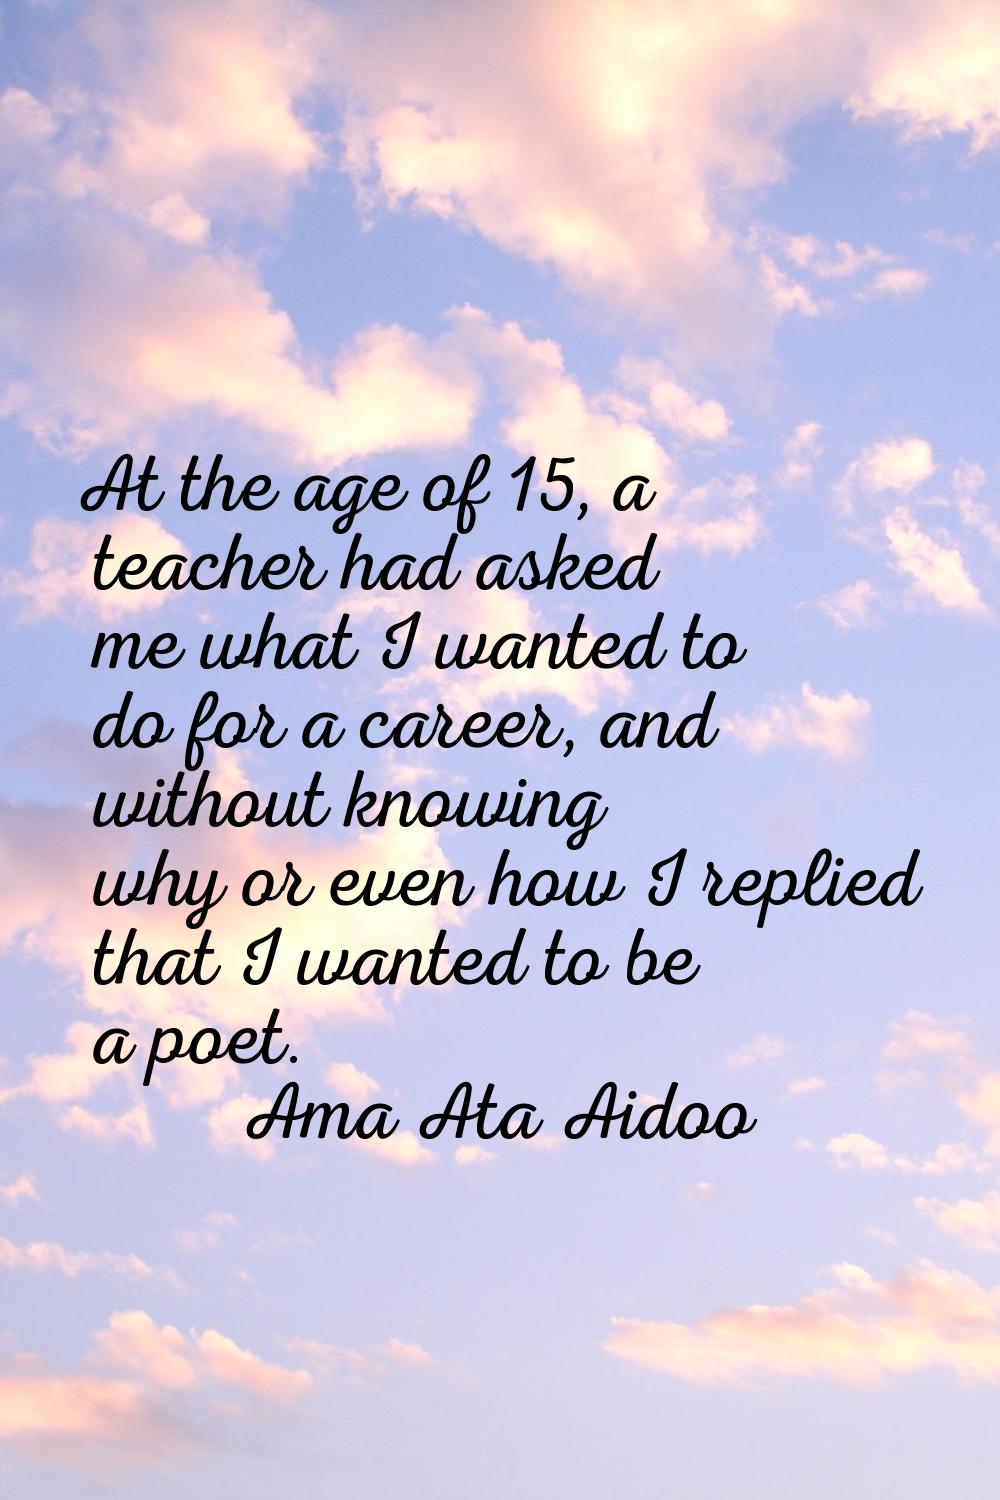 At the age of 15, a teacher had asked me what I wanted to do for a career, and without knowing why 